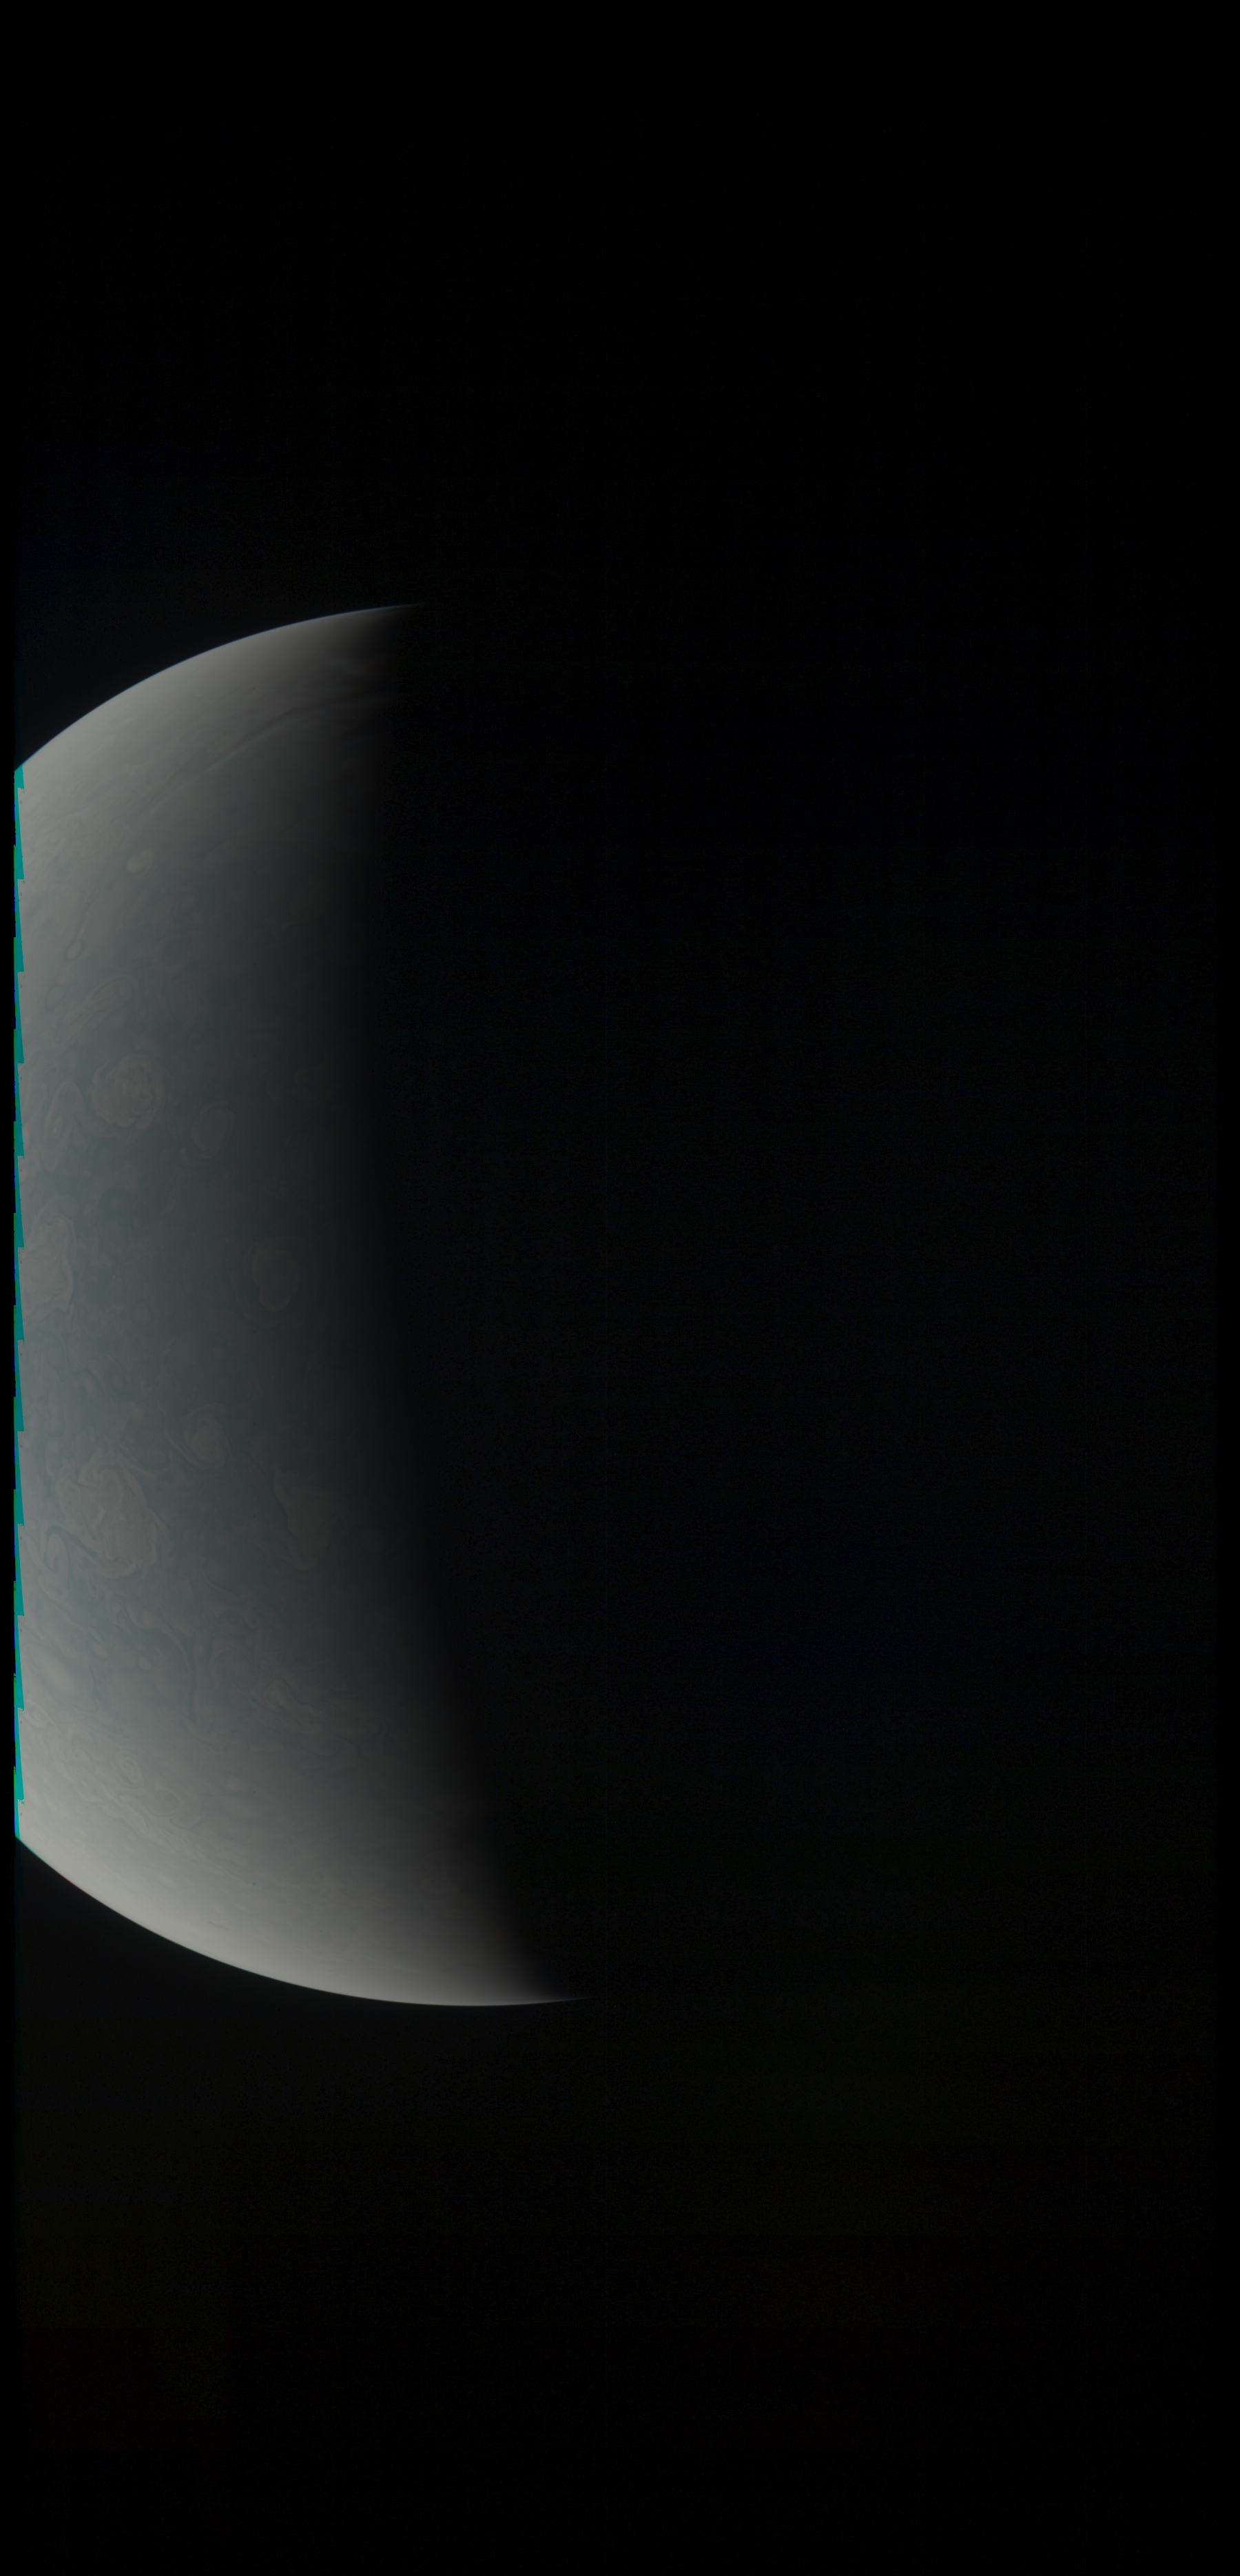 JNCE_2017244_08C00105_V01-raw_proc_hollow_sphere_c_pj_out.BMP_thumbnail_.png